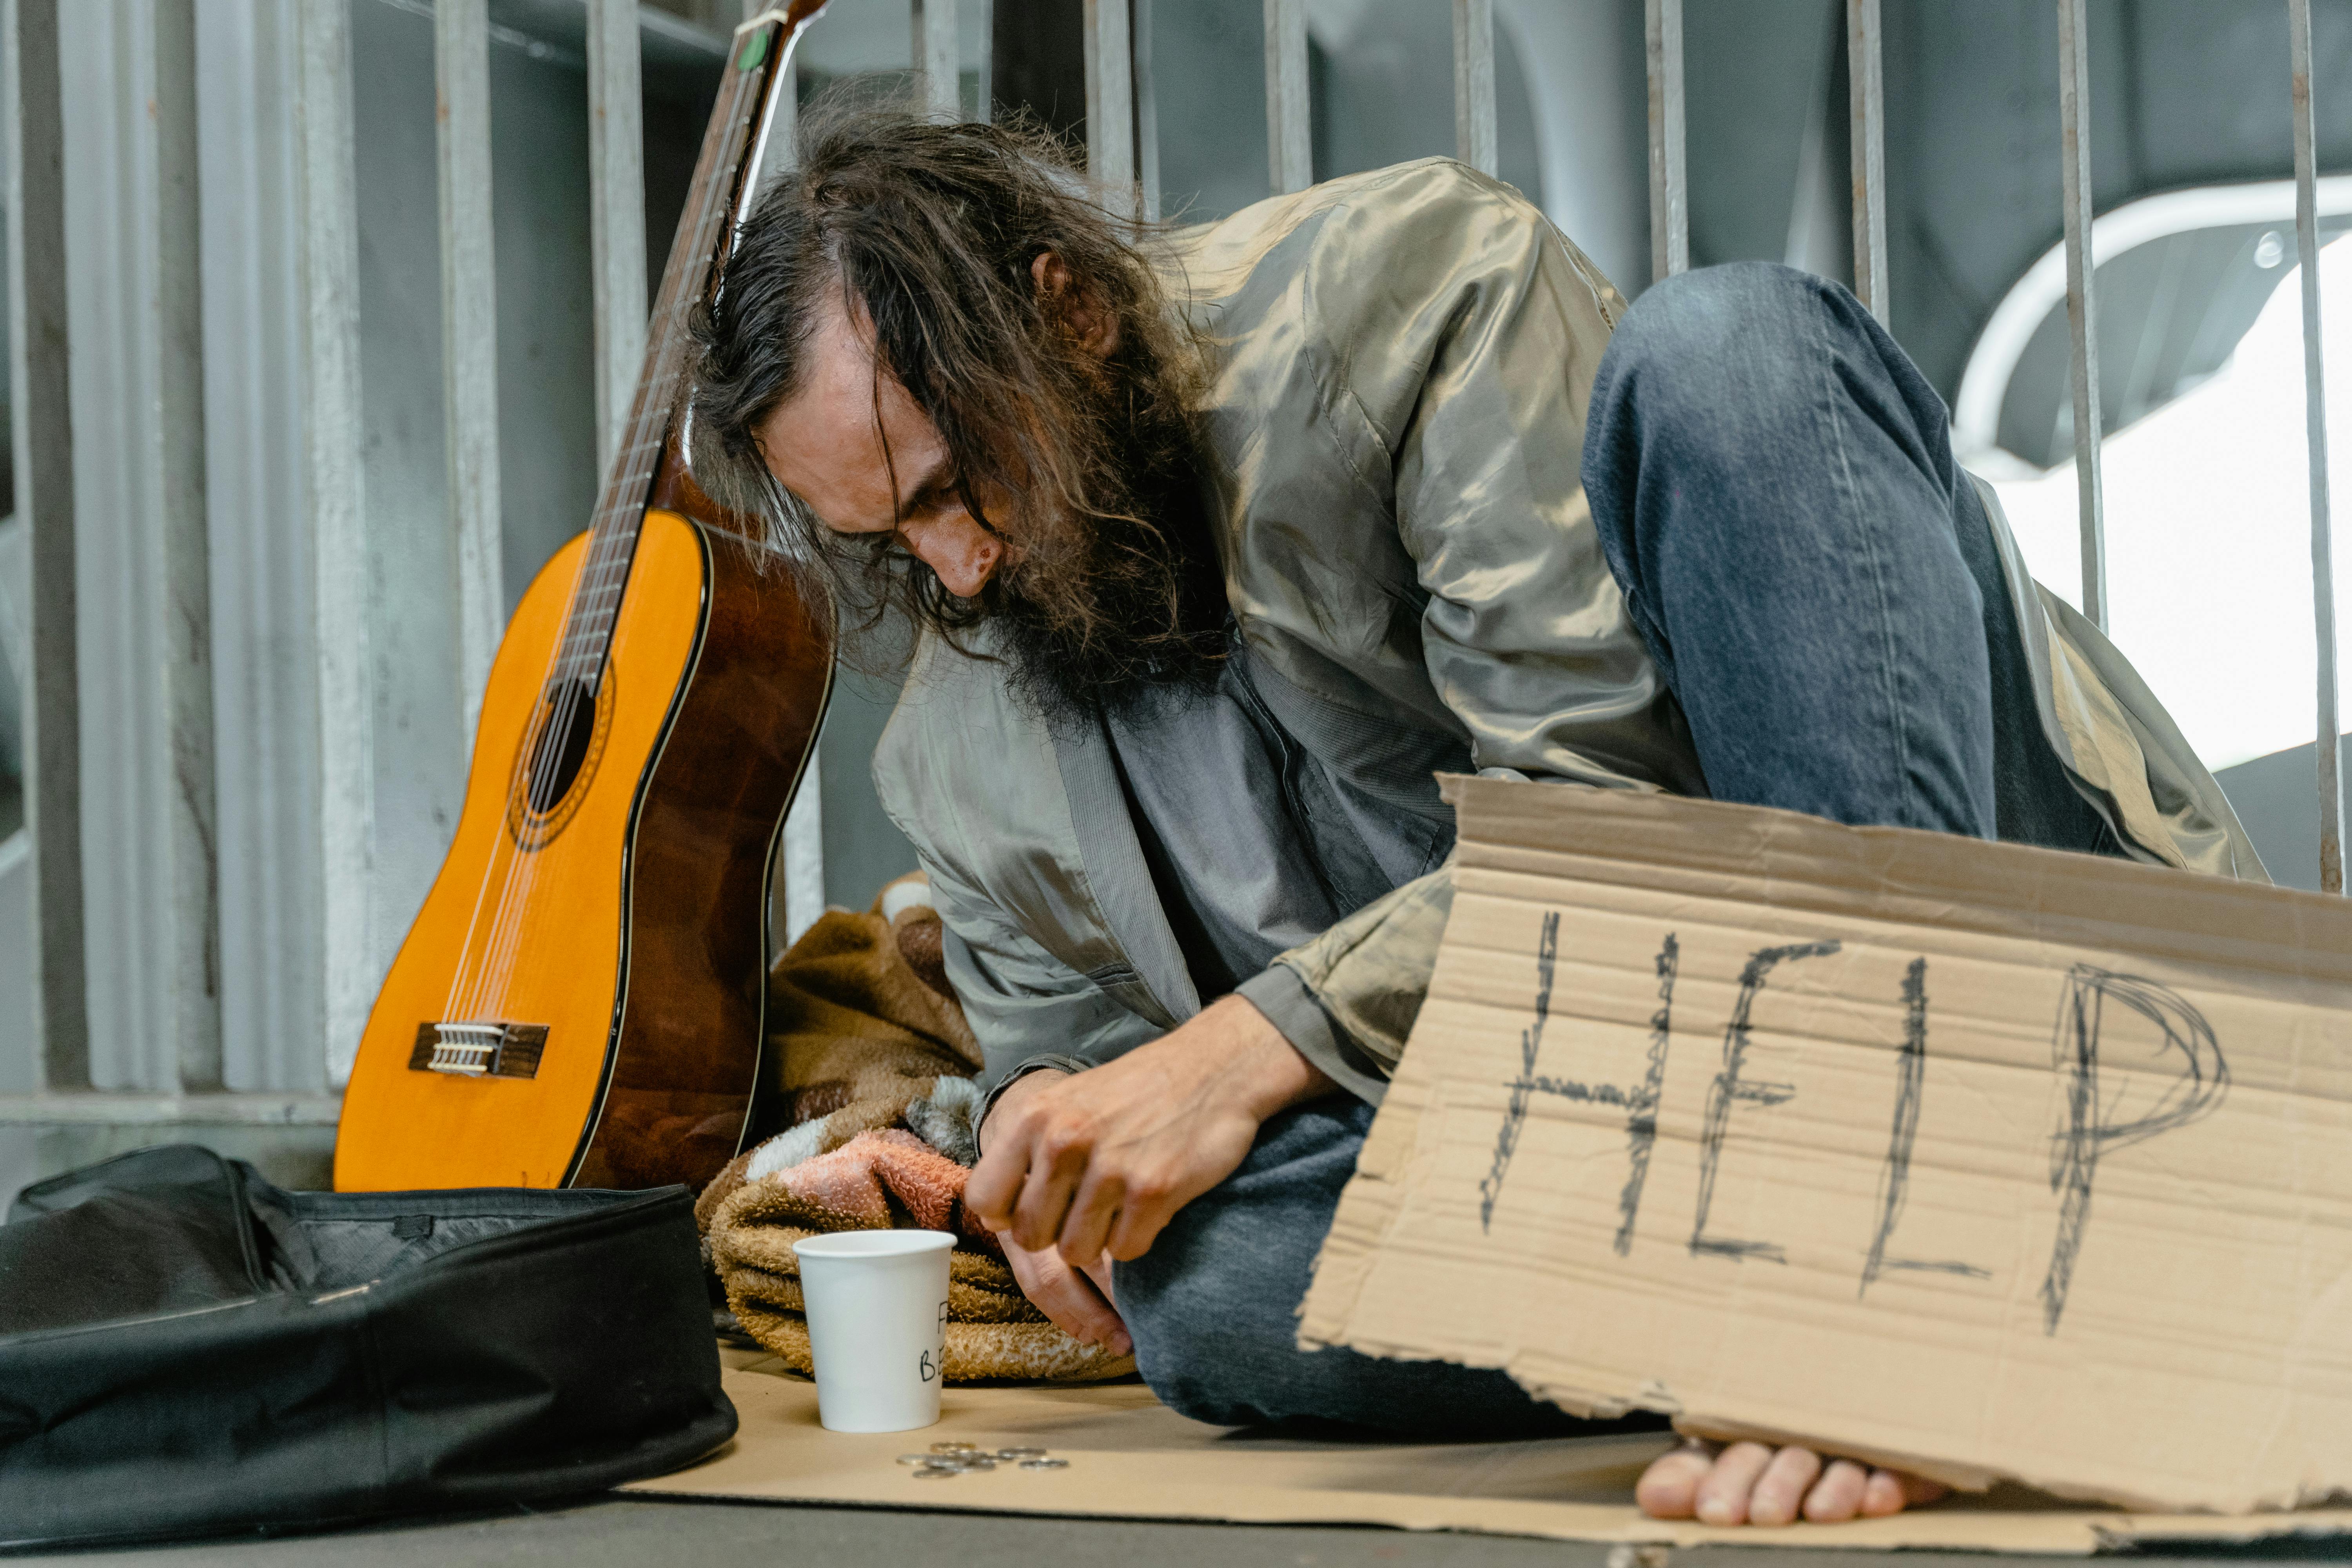 Homeless man with a sign | Source: Pexels